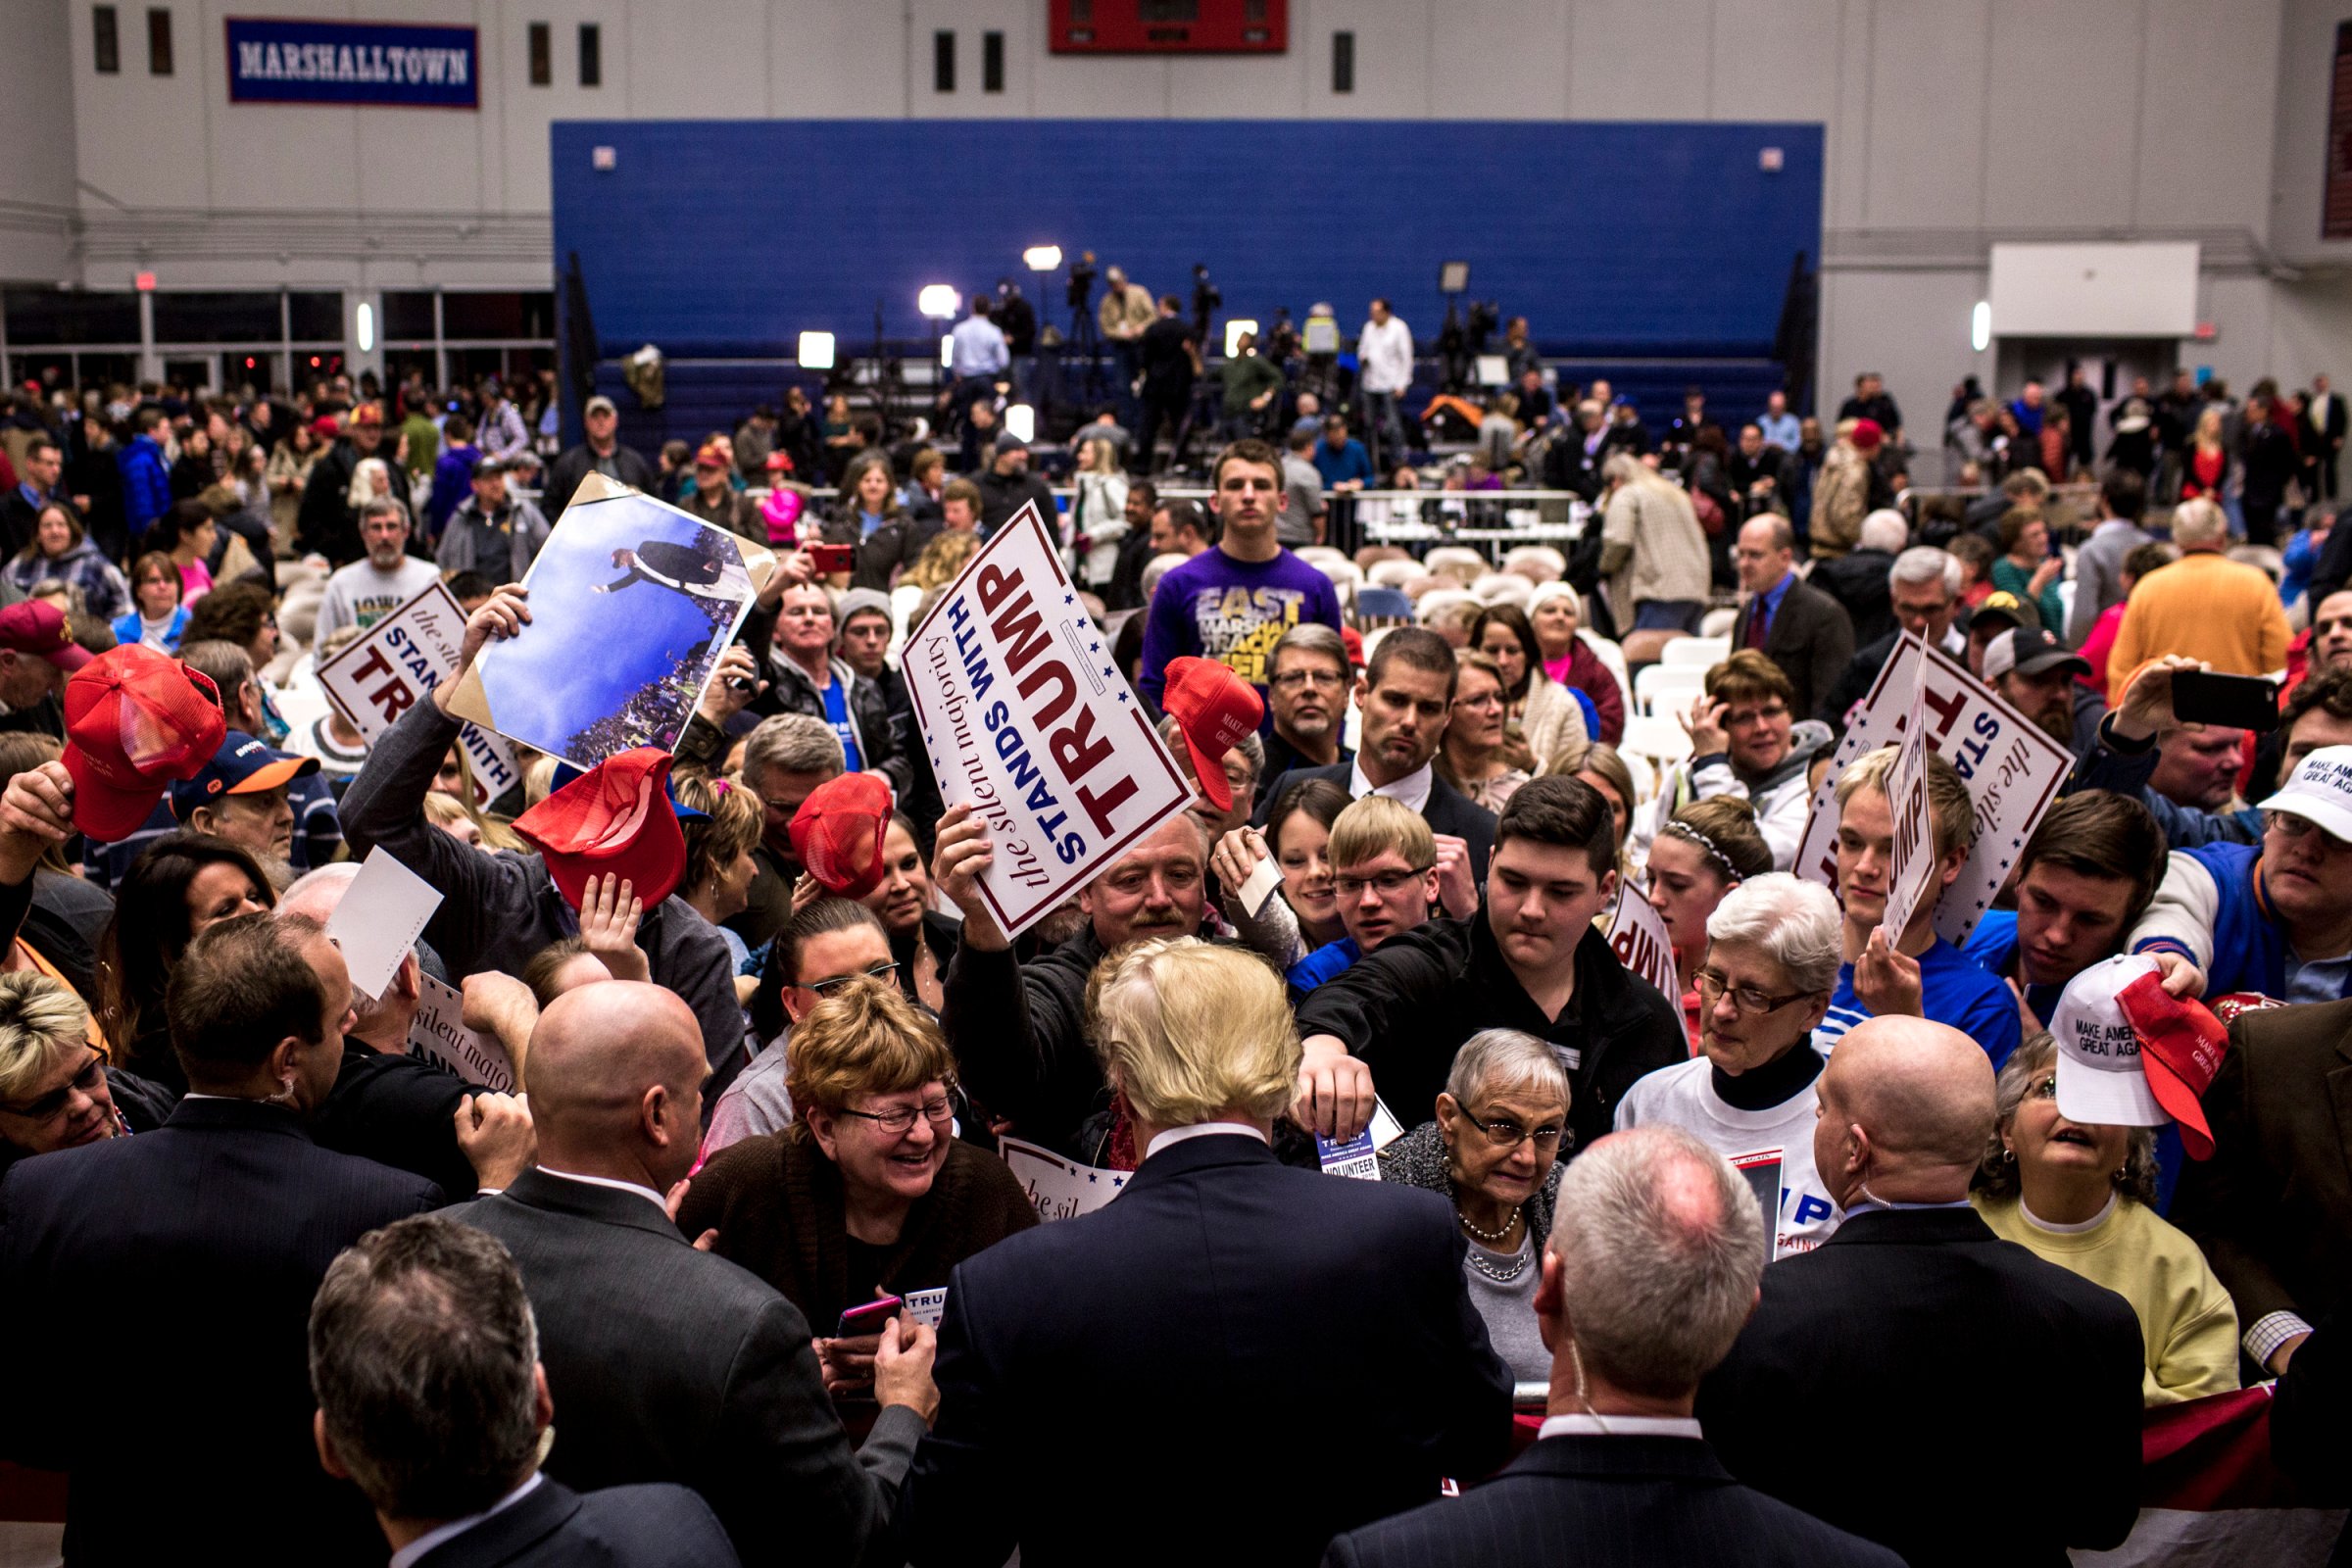 Donald Trump greets supporters at a rally on Jan. 26, 2016, in Des Moines, Iowa.